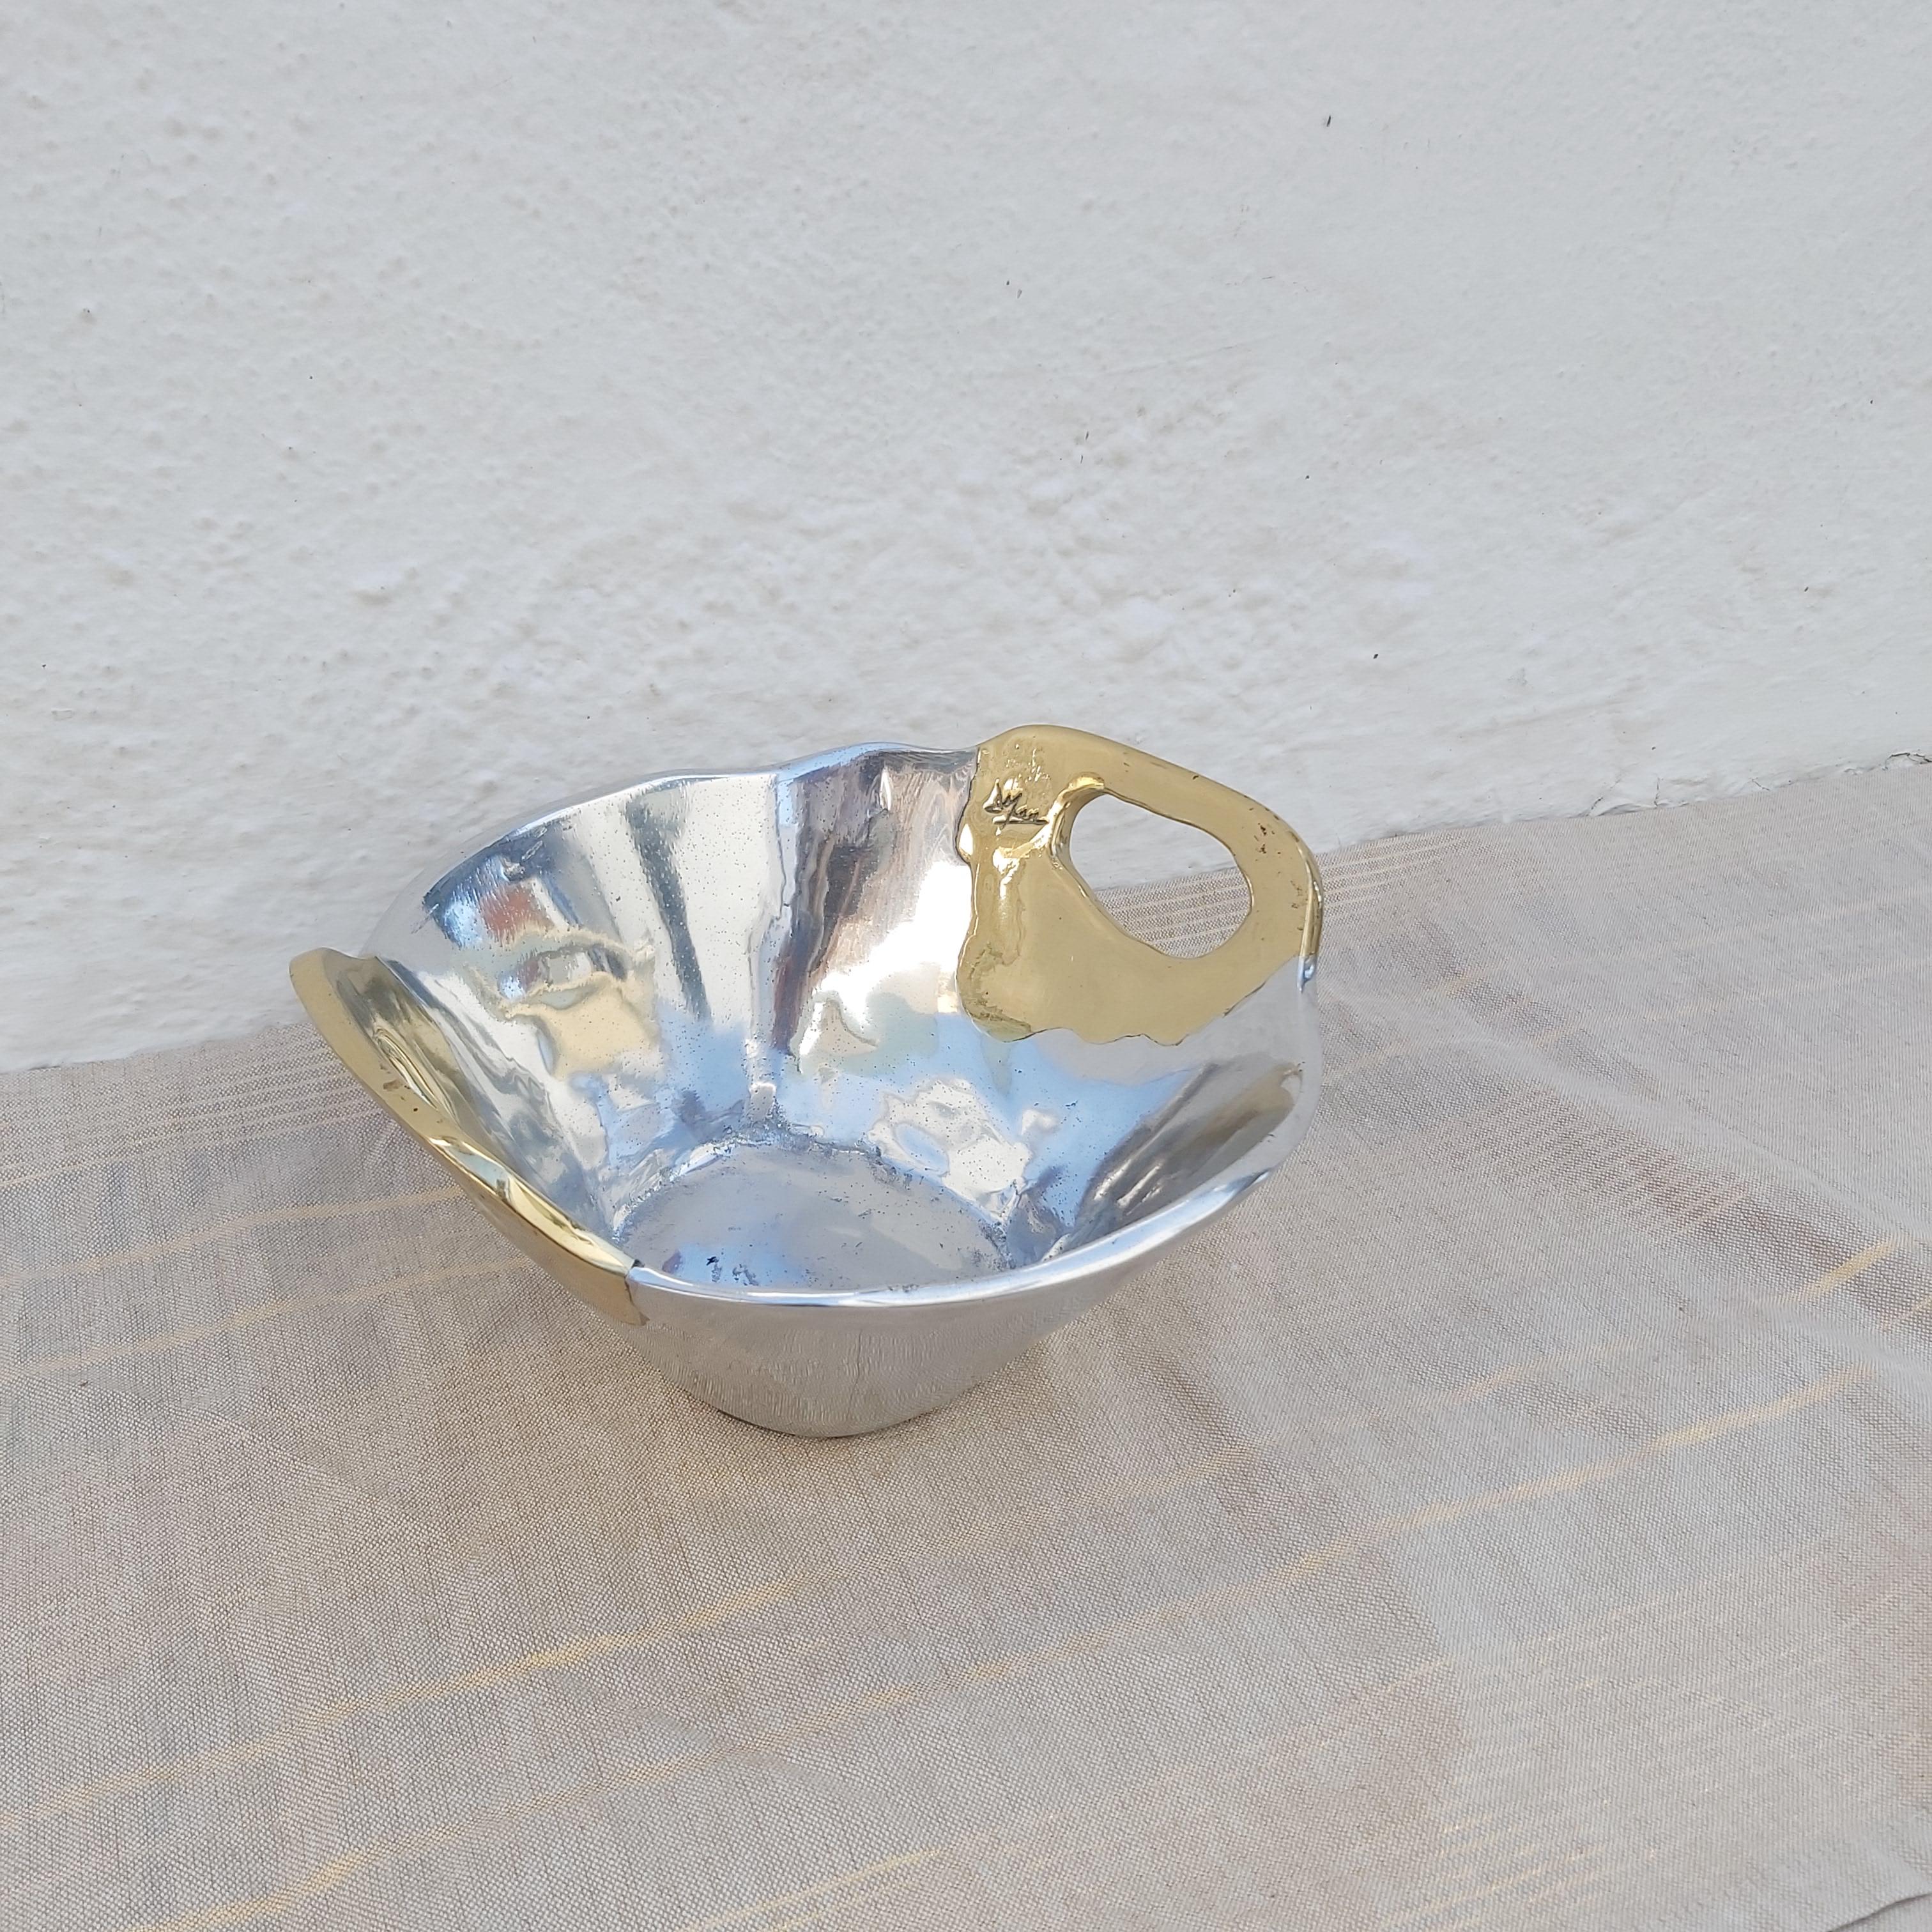 Spanish Brutalist Small Metal Bowl A018 Solid Cast Aluminium & Brass For Sale